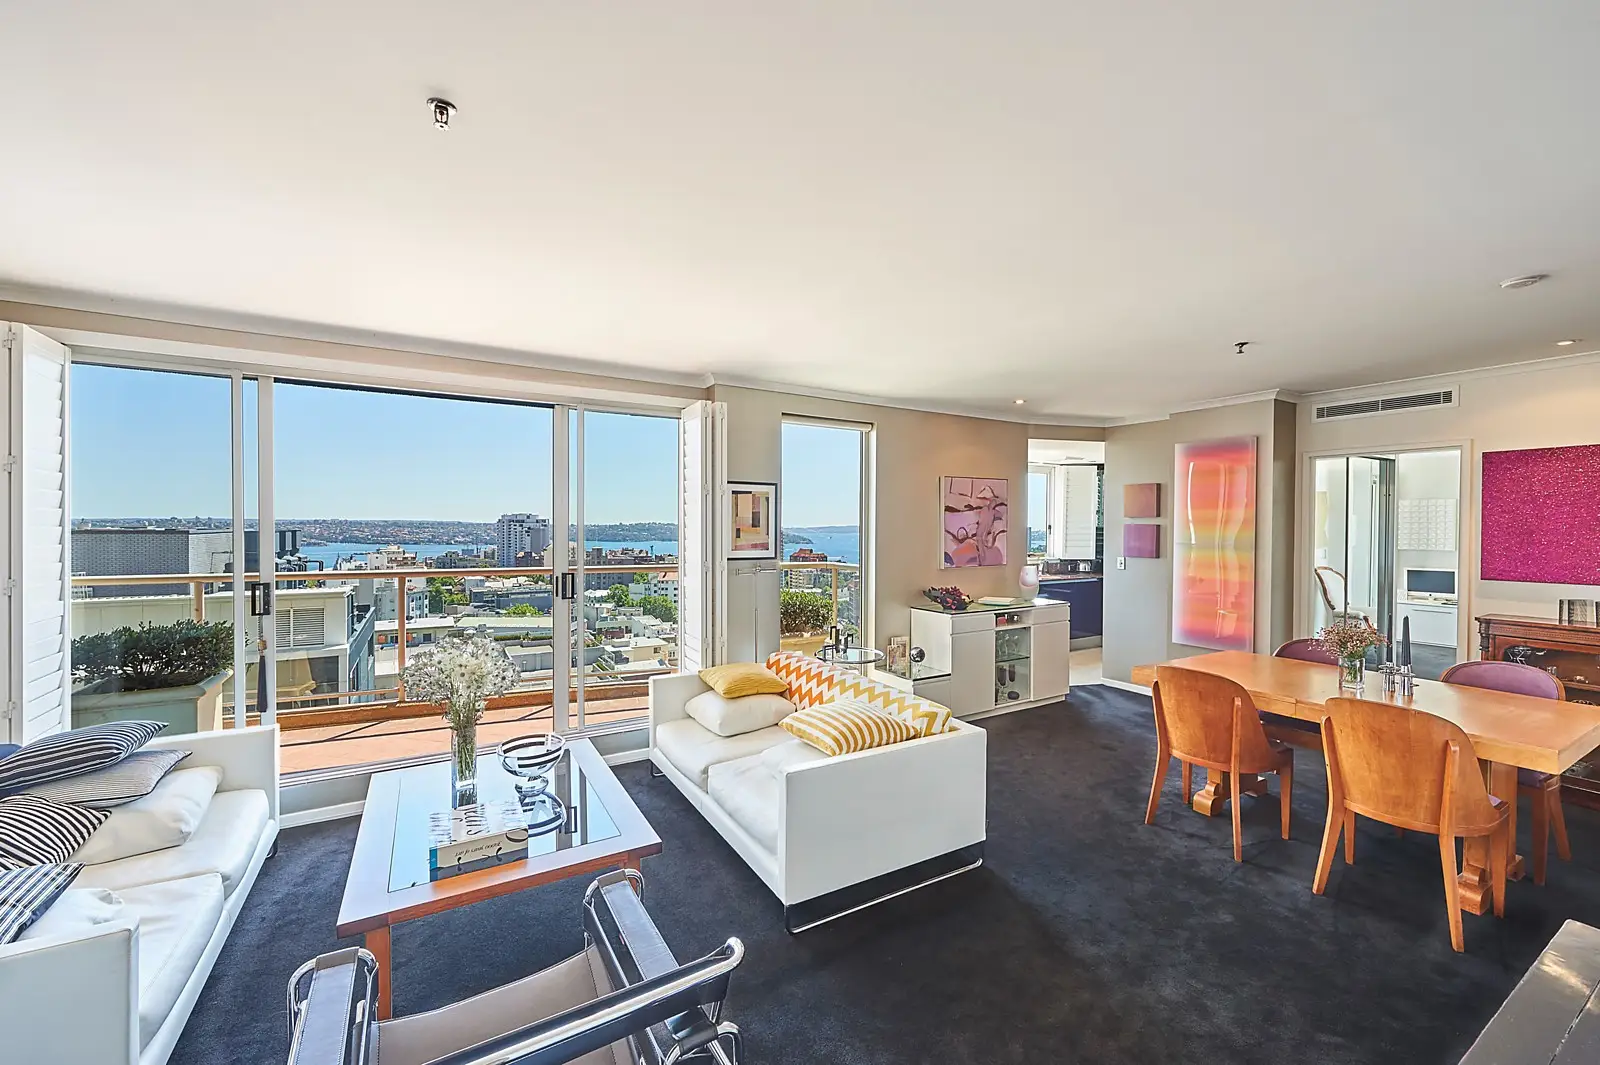 Photo #1: 1809/1 Kings Cross Road, Potts Point - Sold by Sydney Sotheby's International Realty